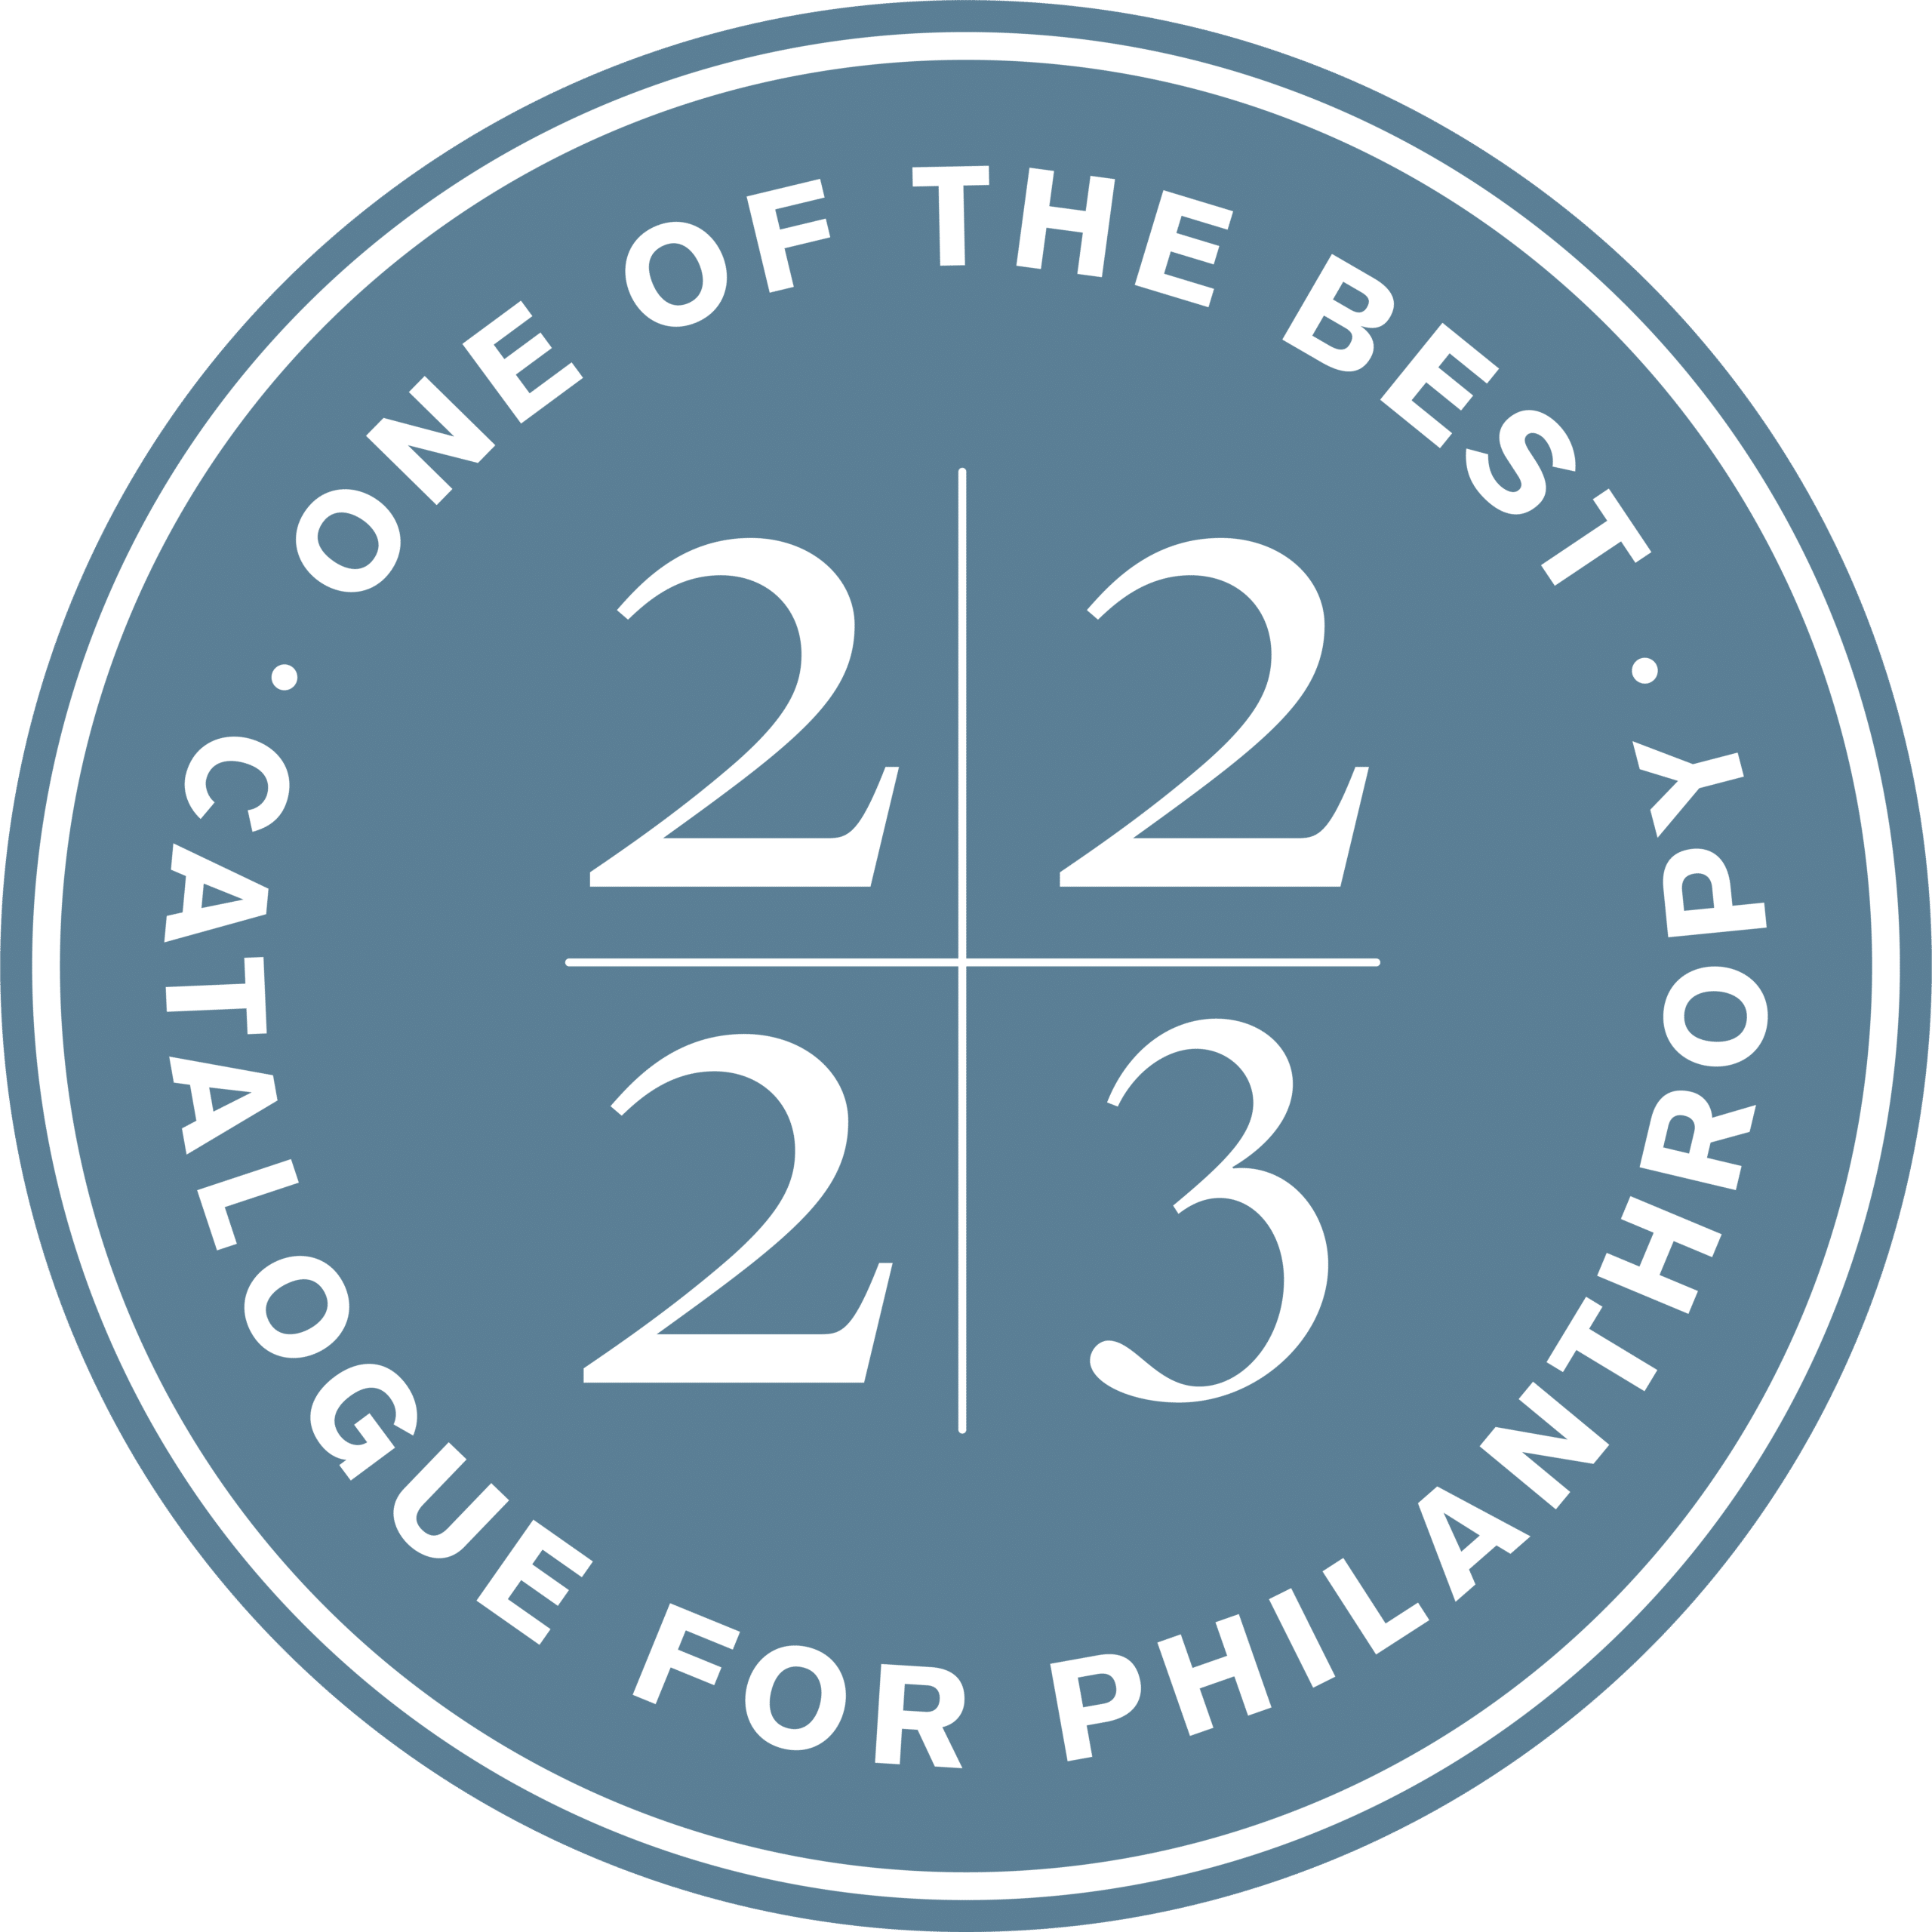 One of the Best - Catalogue For Philanthropy - 2022-2023